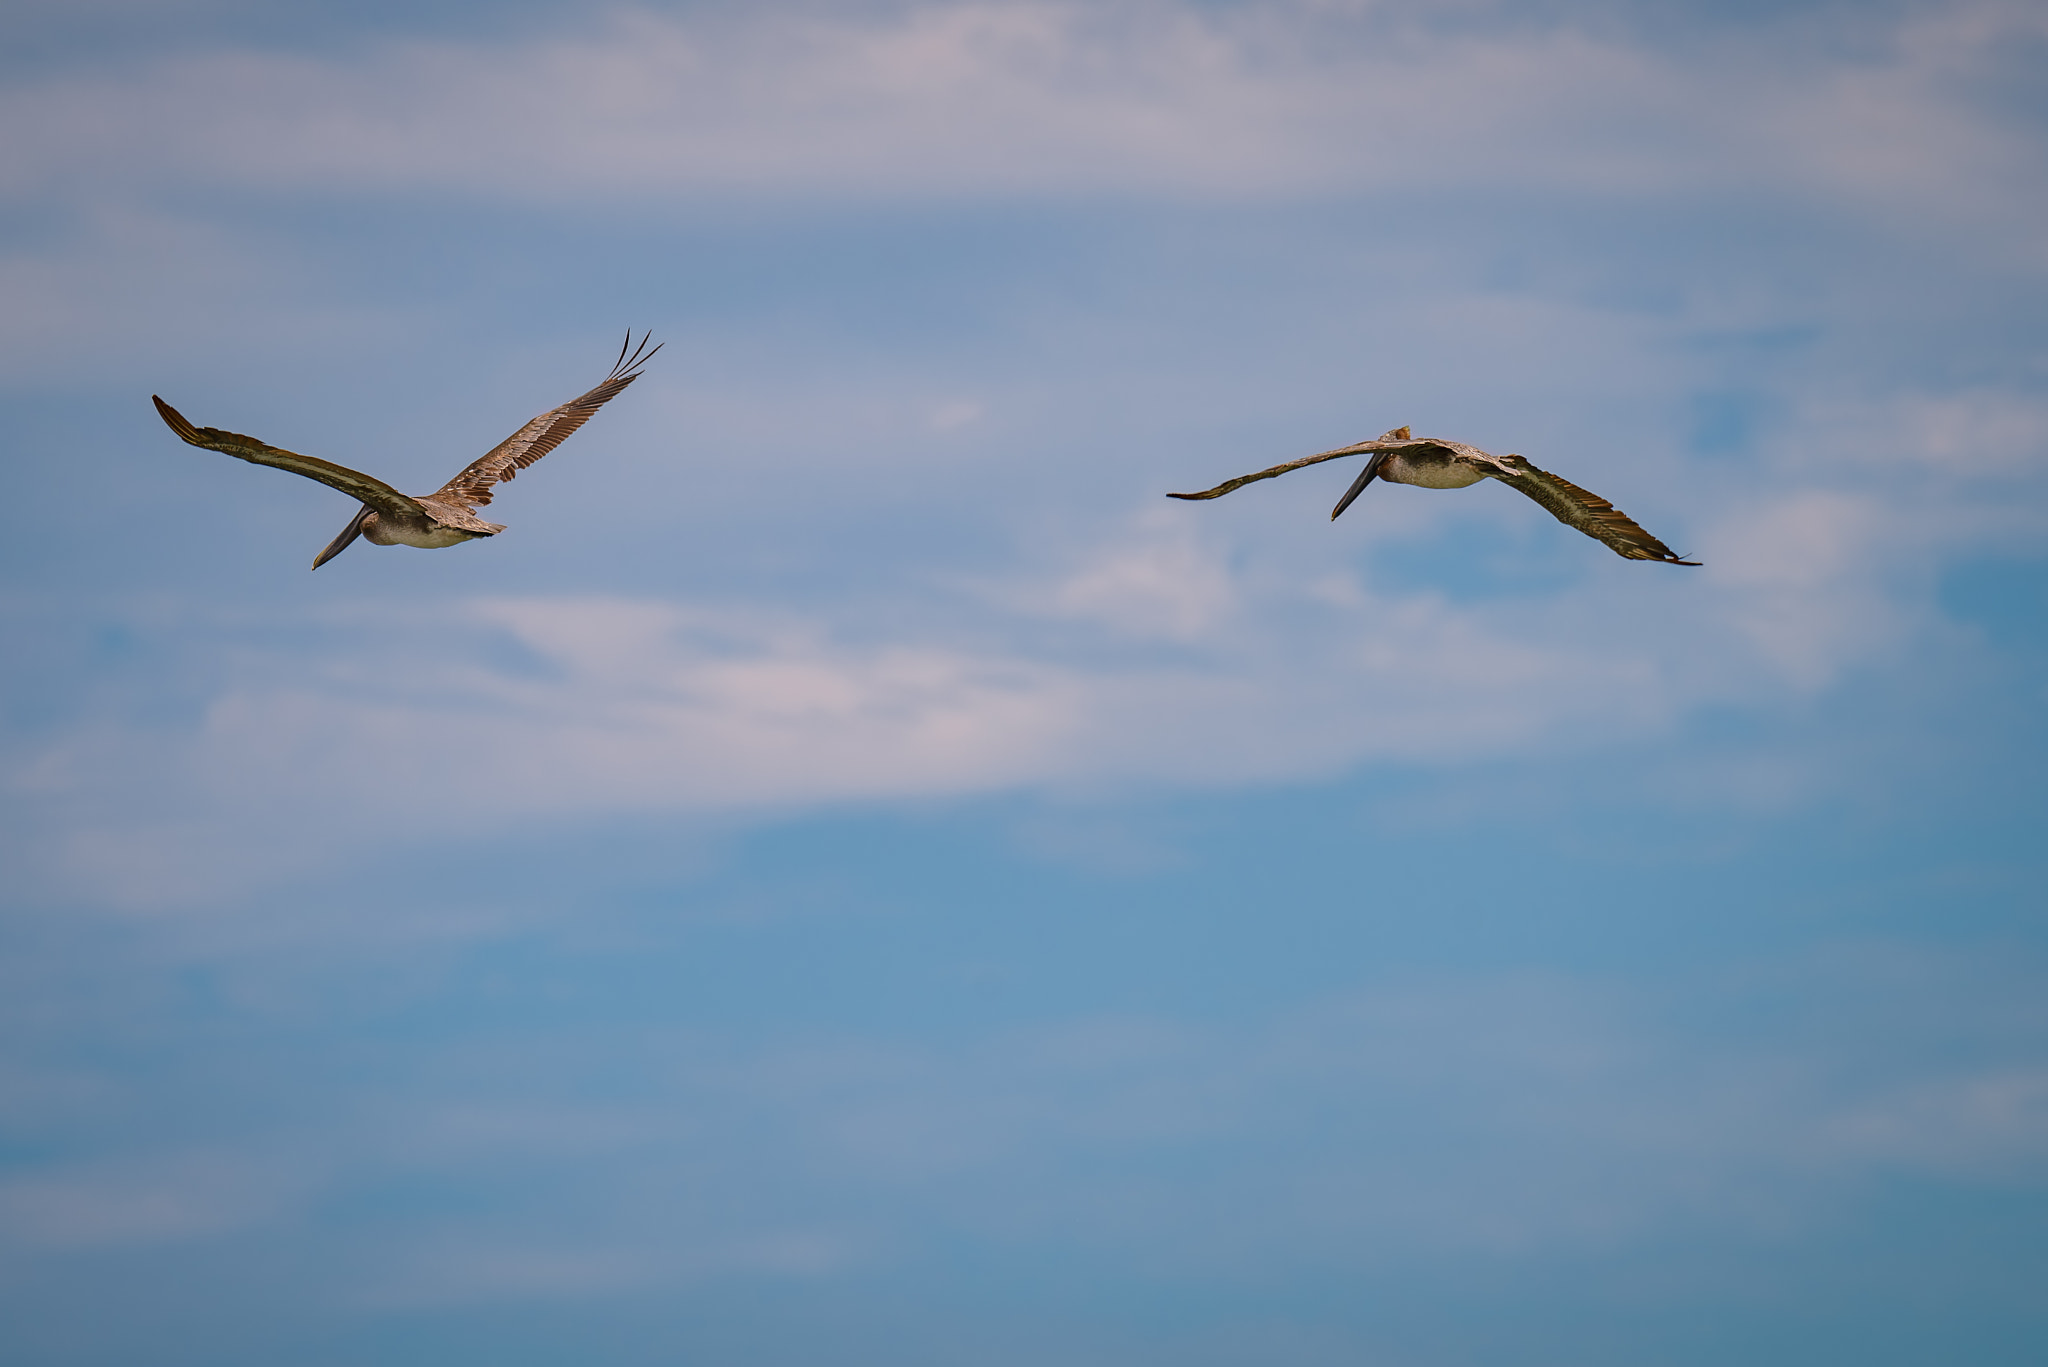 Nikon D800 sample photo. Eastern brown pelicans flying in the blue sky photography